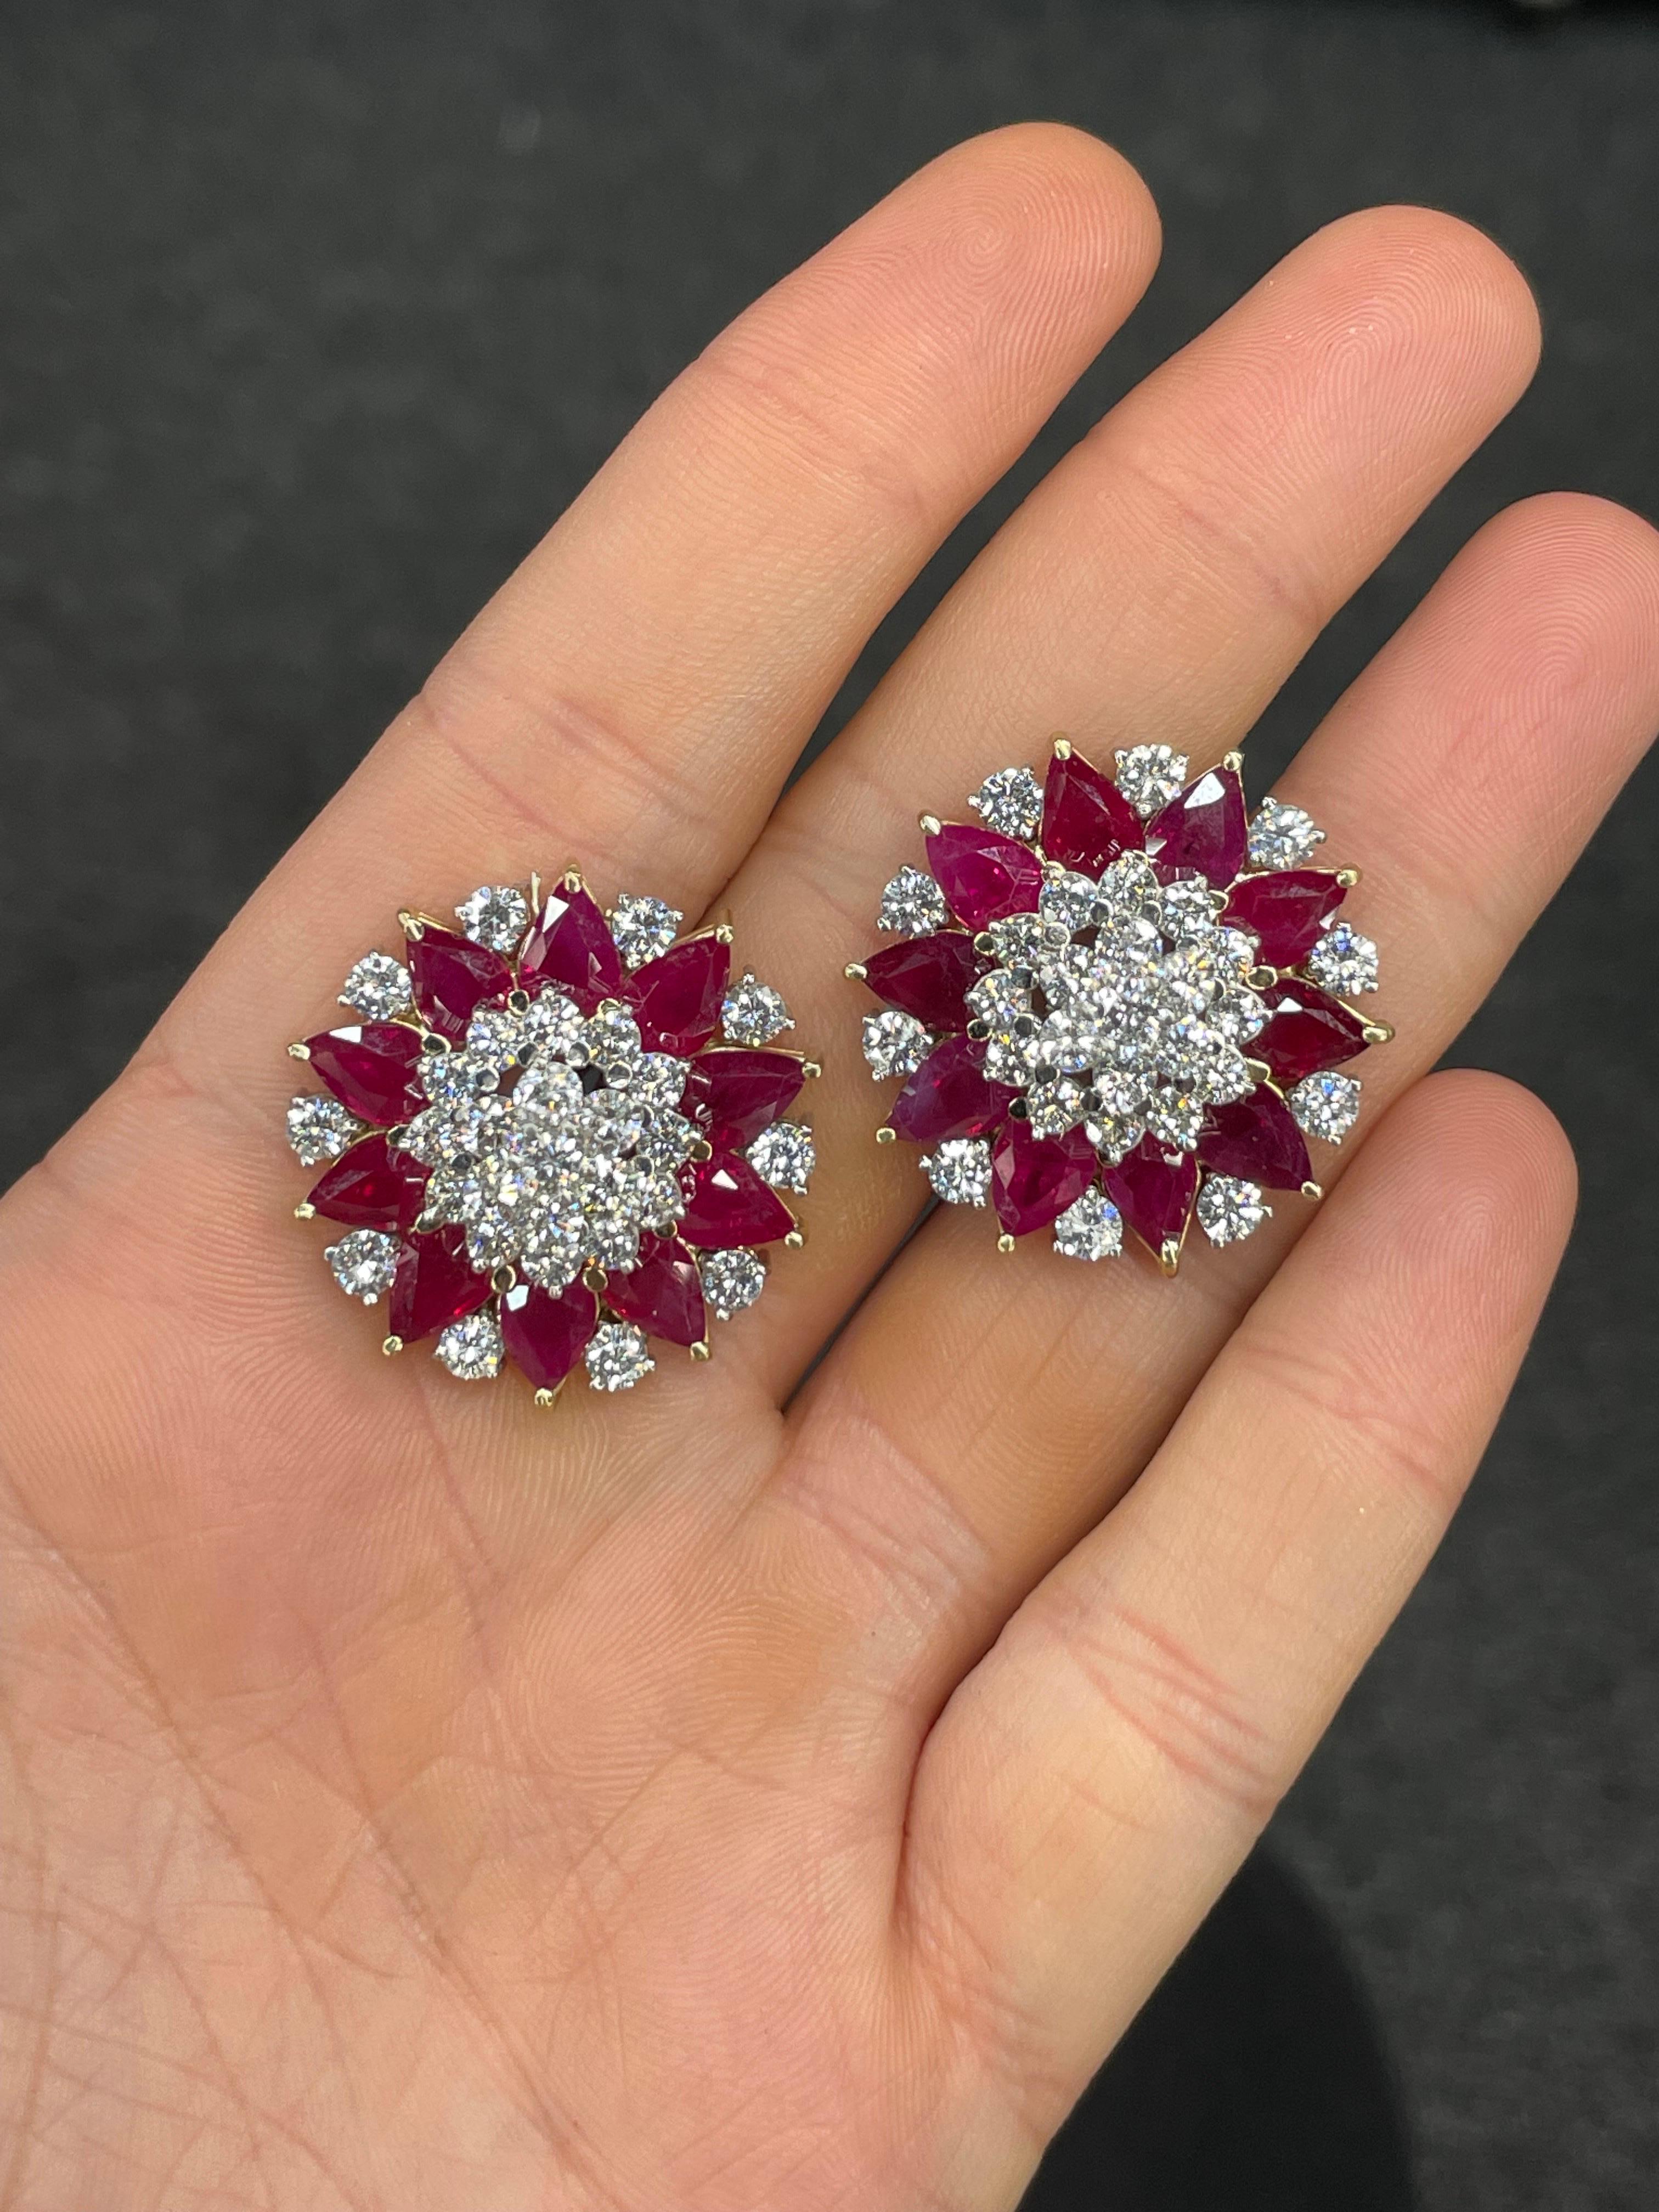 C. DUNAIGRE Burma Ruby Heated Diamond Cluster Star Earrings 28 CTTW  In Excellent Condition For Sale In New York, NY